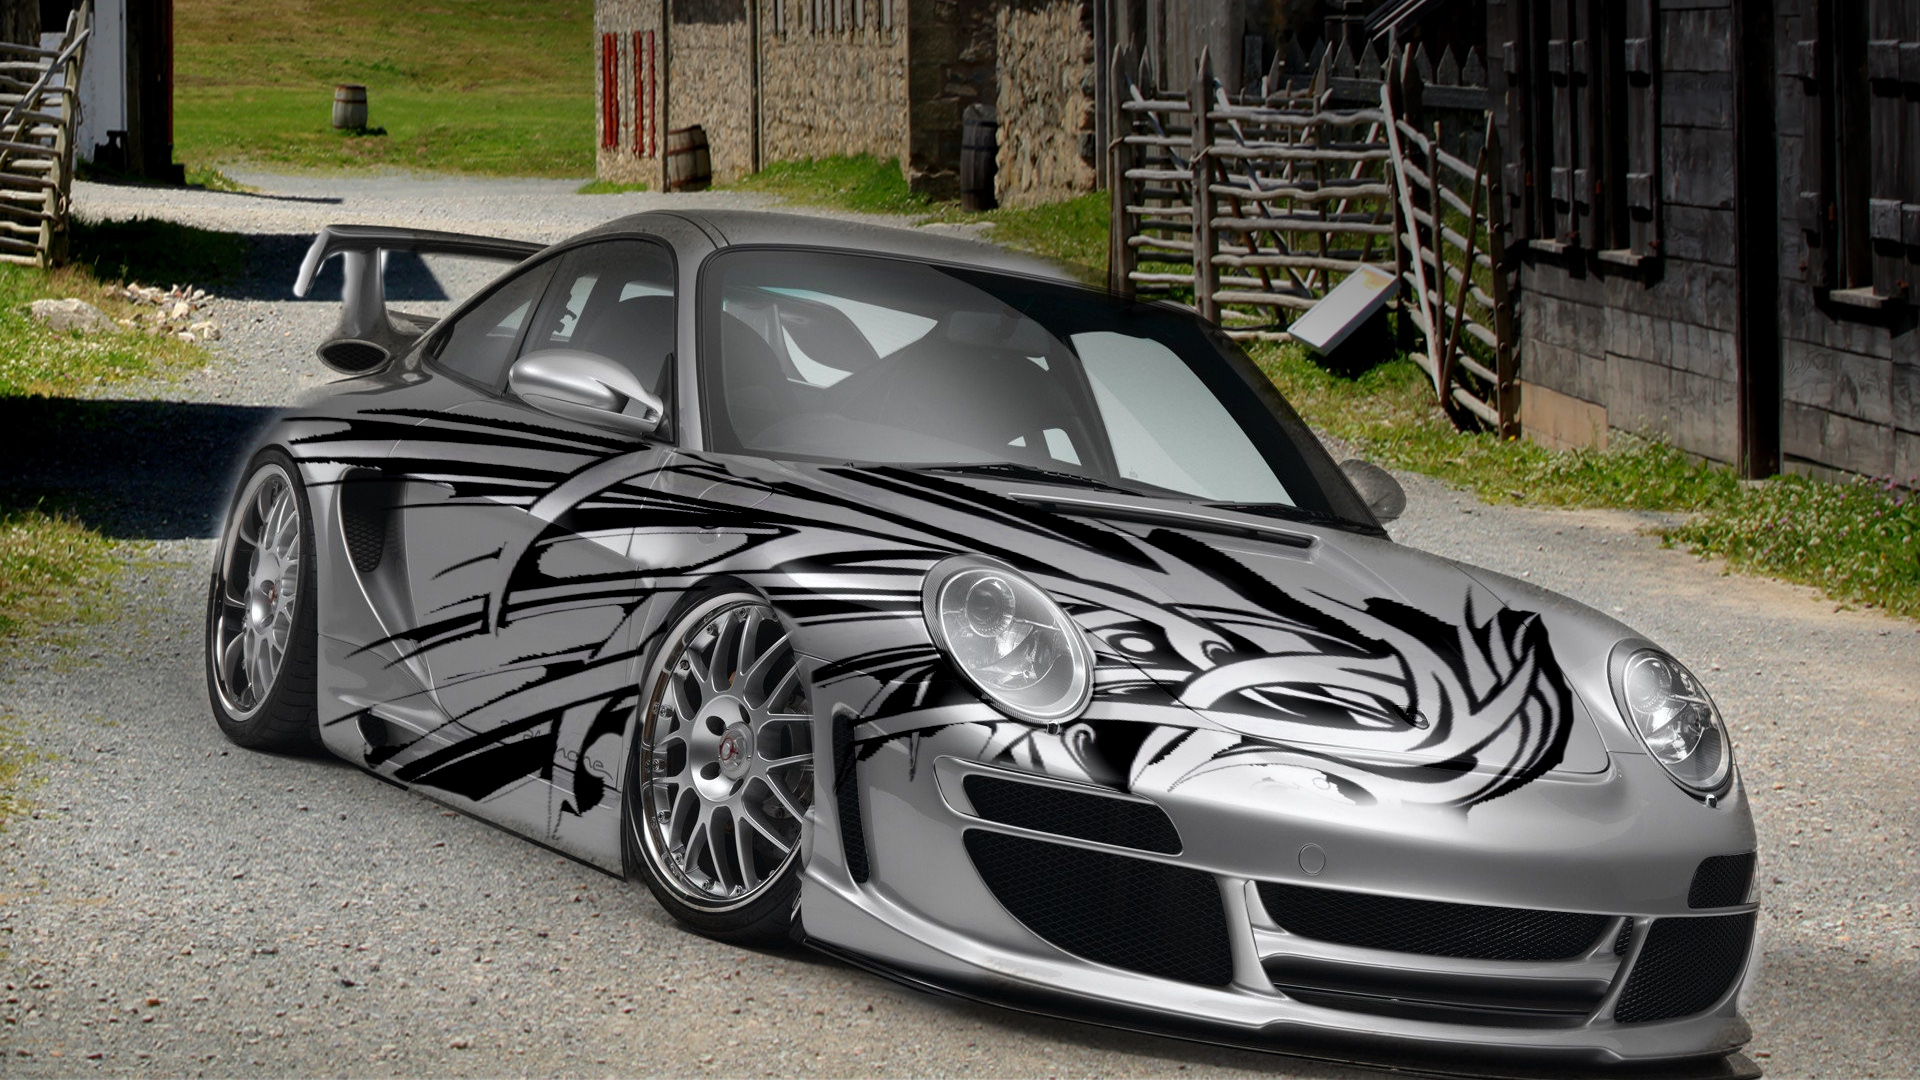 Porsche 911 Latest Modified Car 1920x1080 - 9to5 Car Wallpapers